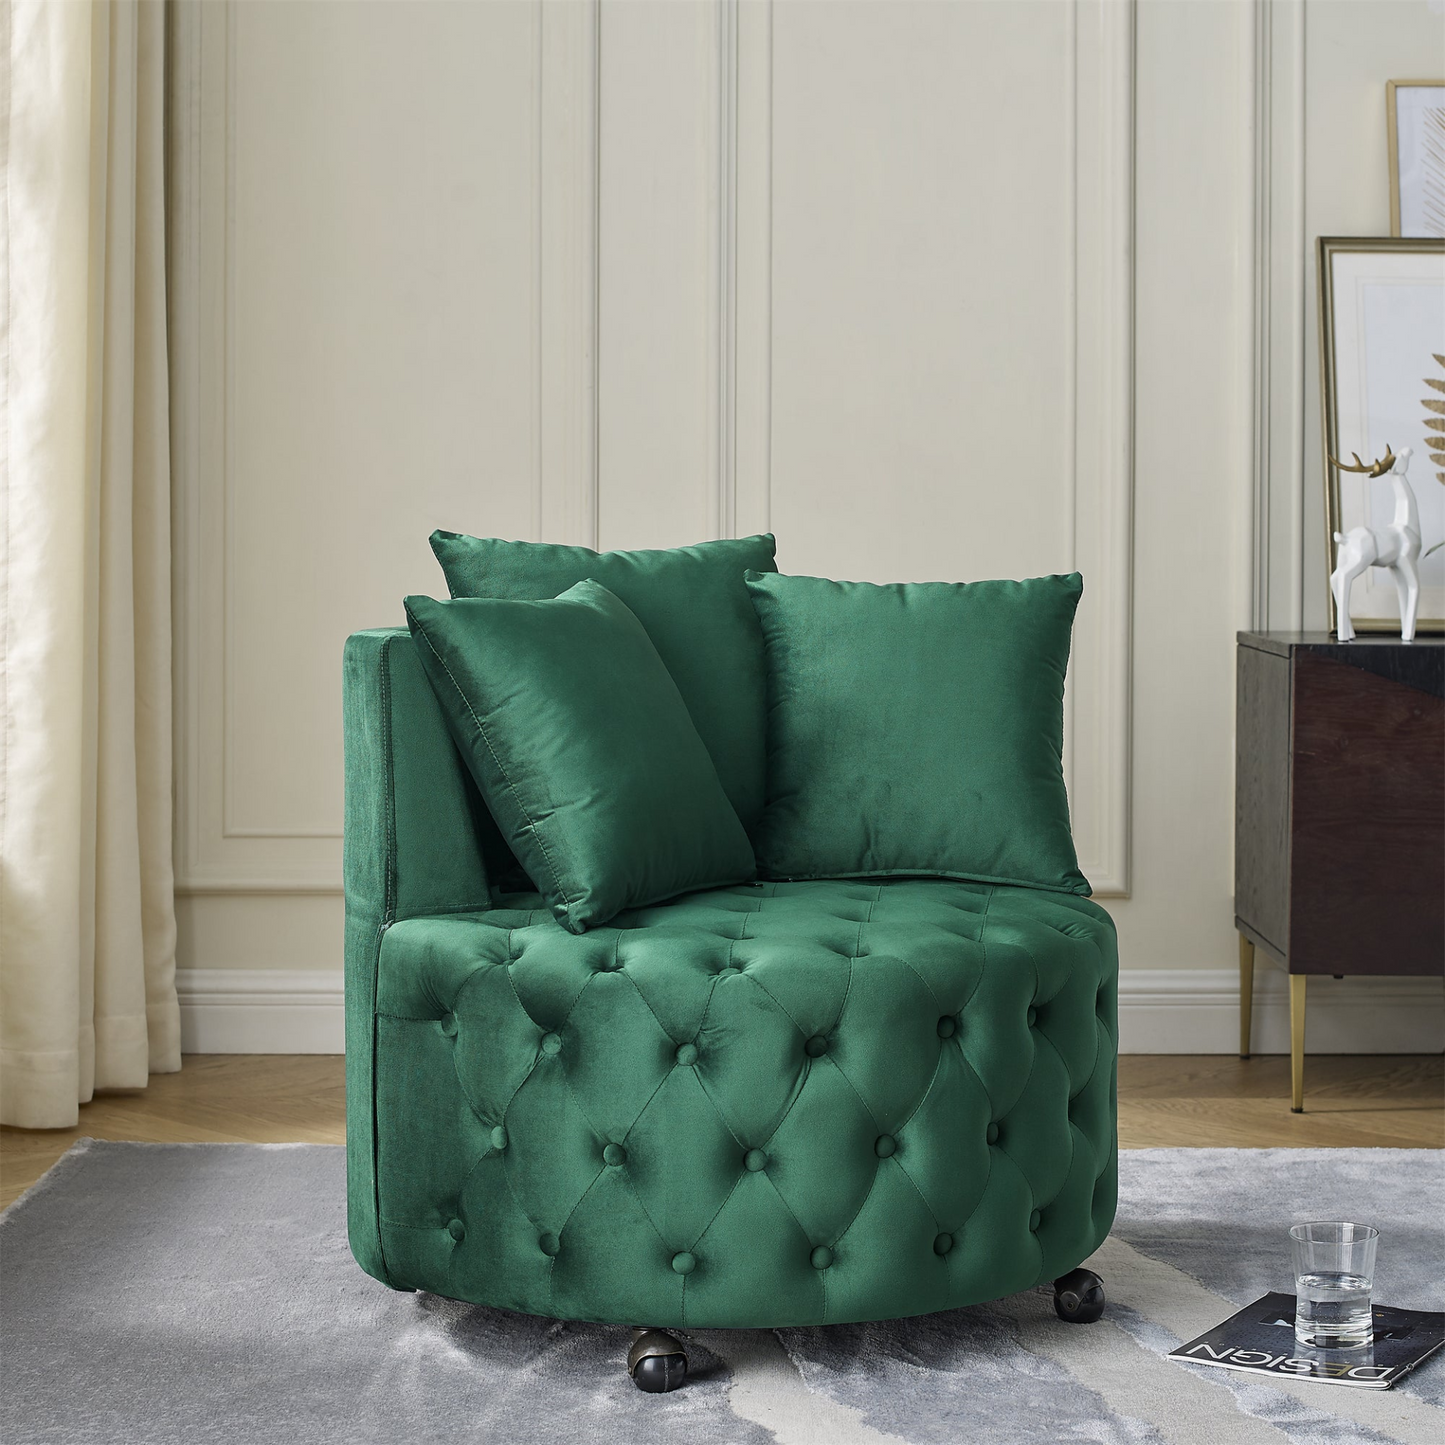 Velvet Upholstered Swivel Chair w/Button Tufted Design and Movable Wheels, Including 3 Pillows, Green